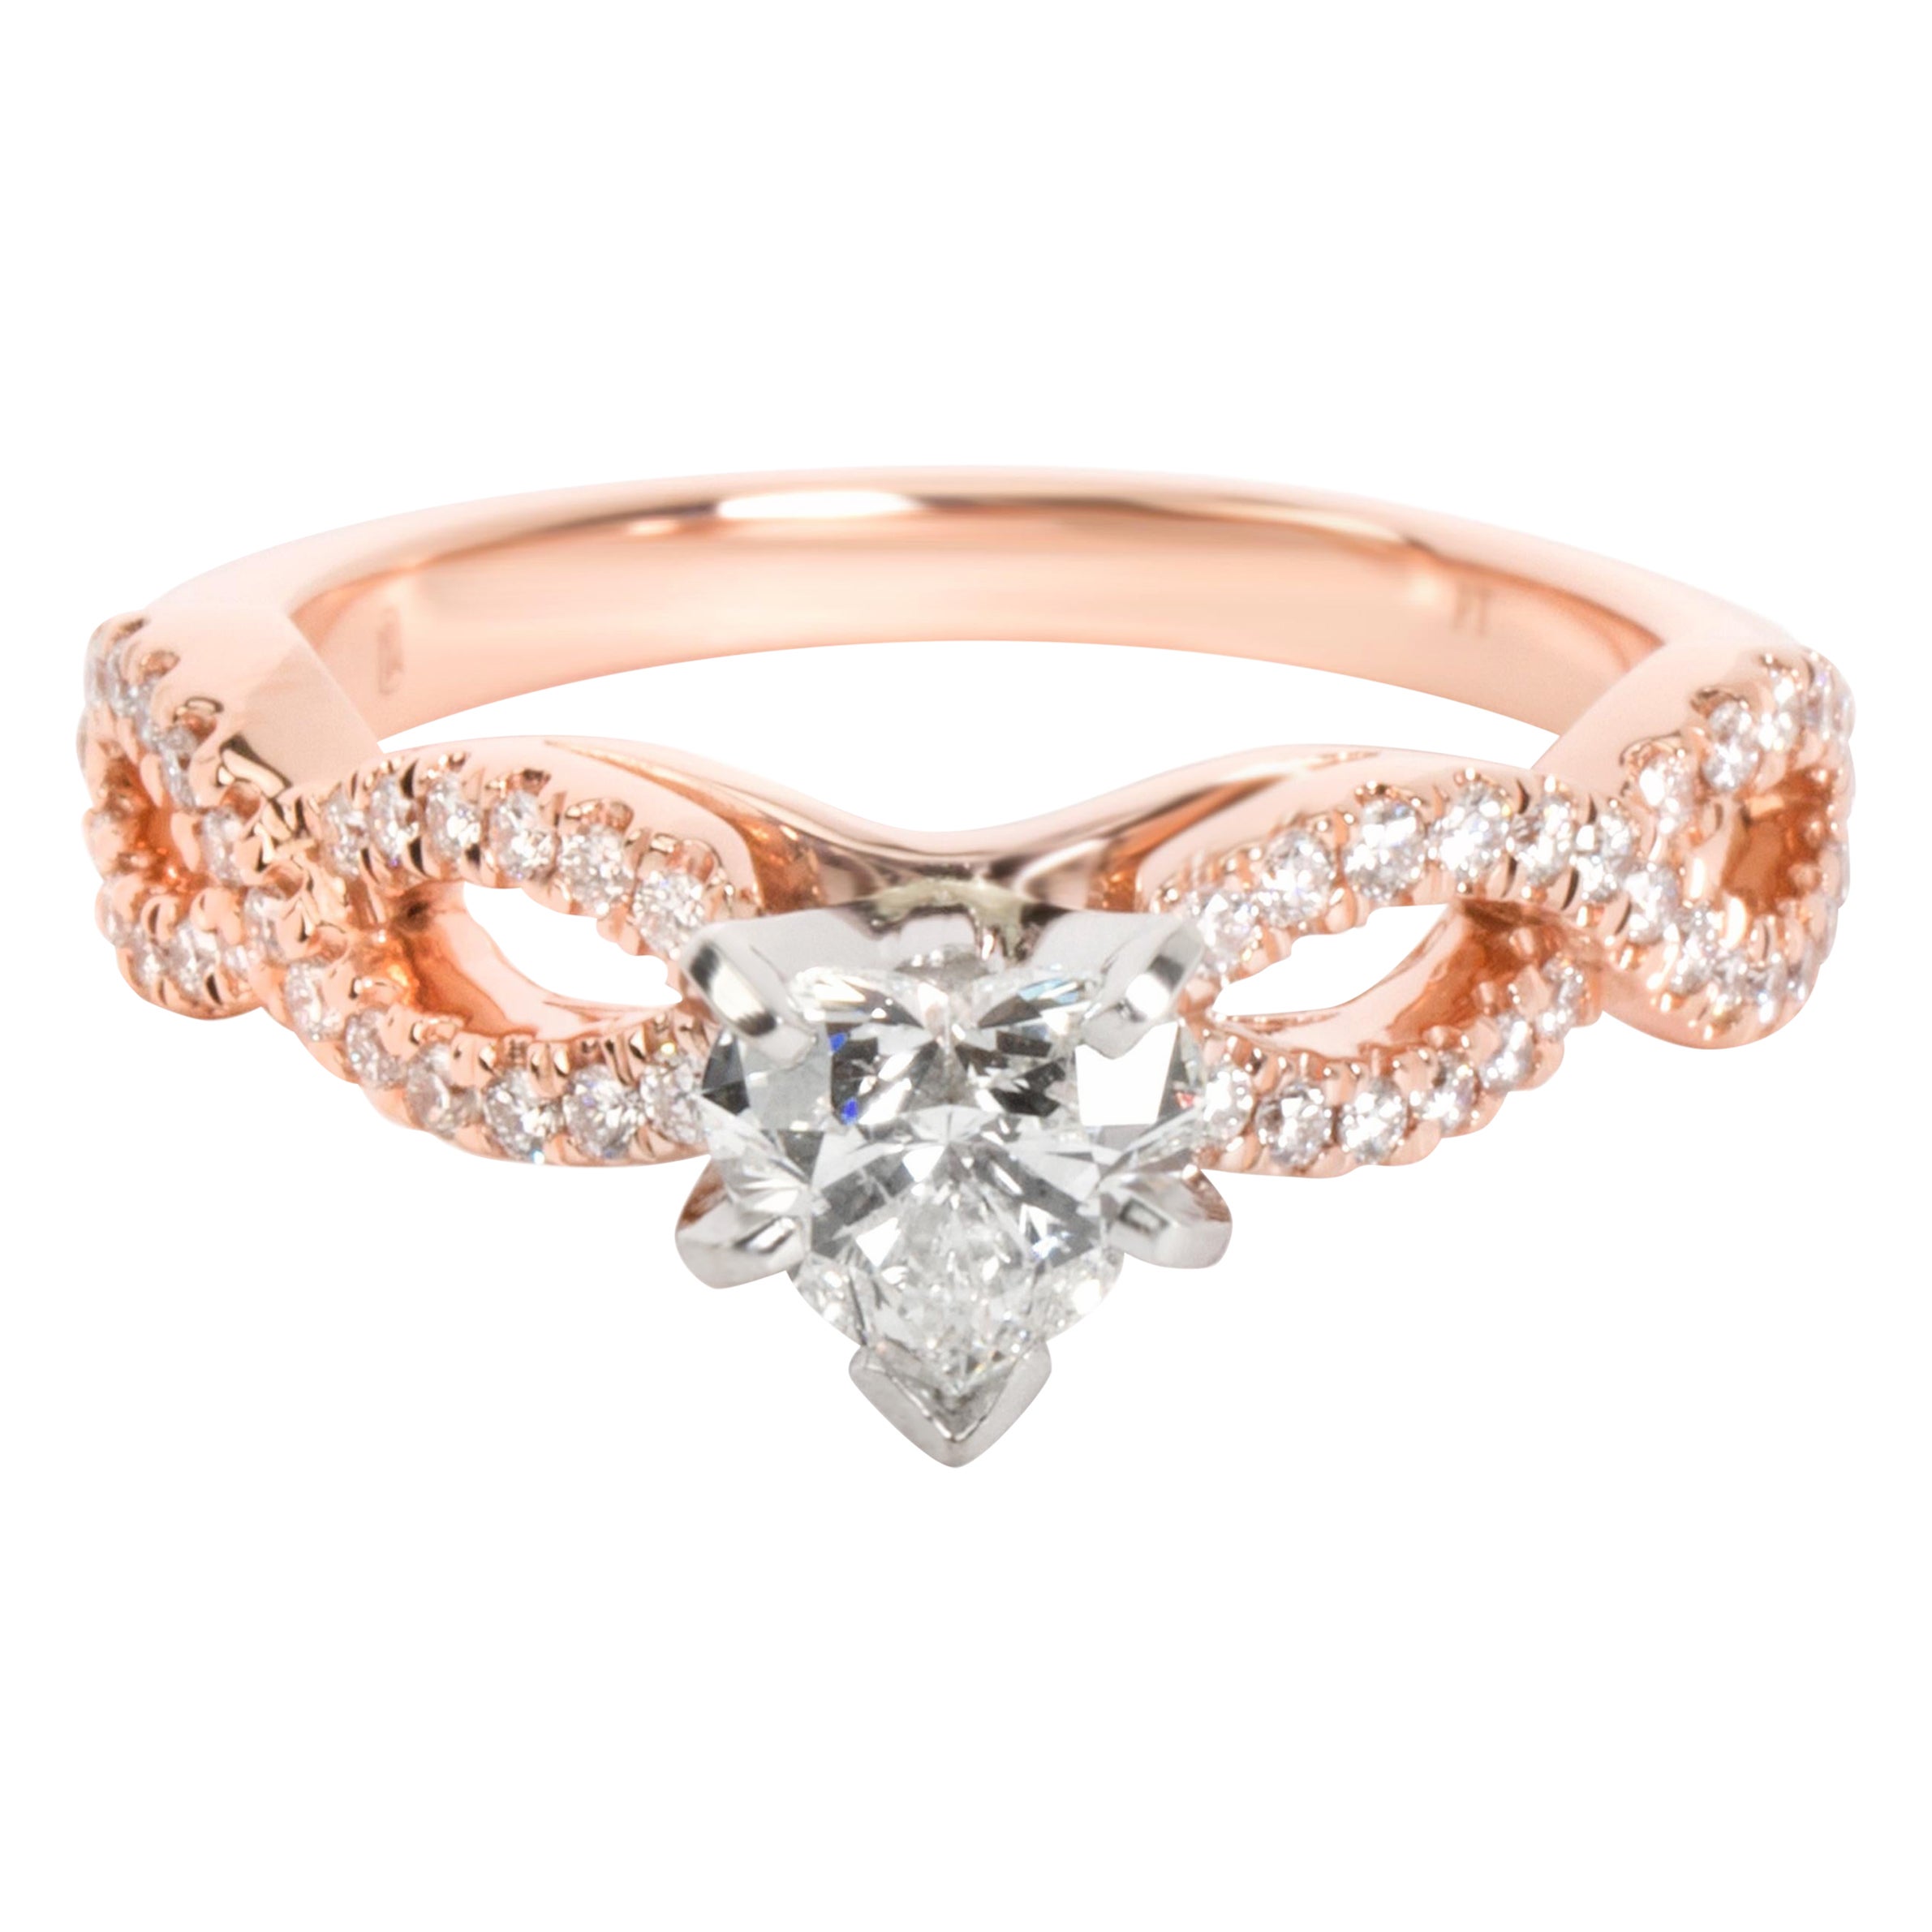 Blue Nile Diamond Heart Shaped Engagement Ring in 14K Rose Gold '0.50 ct  H/SI1' For Sale at 1stDibs